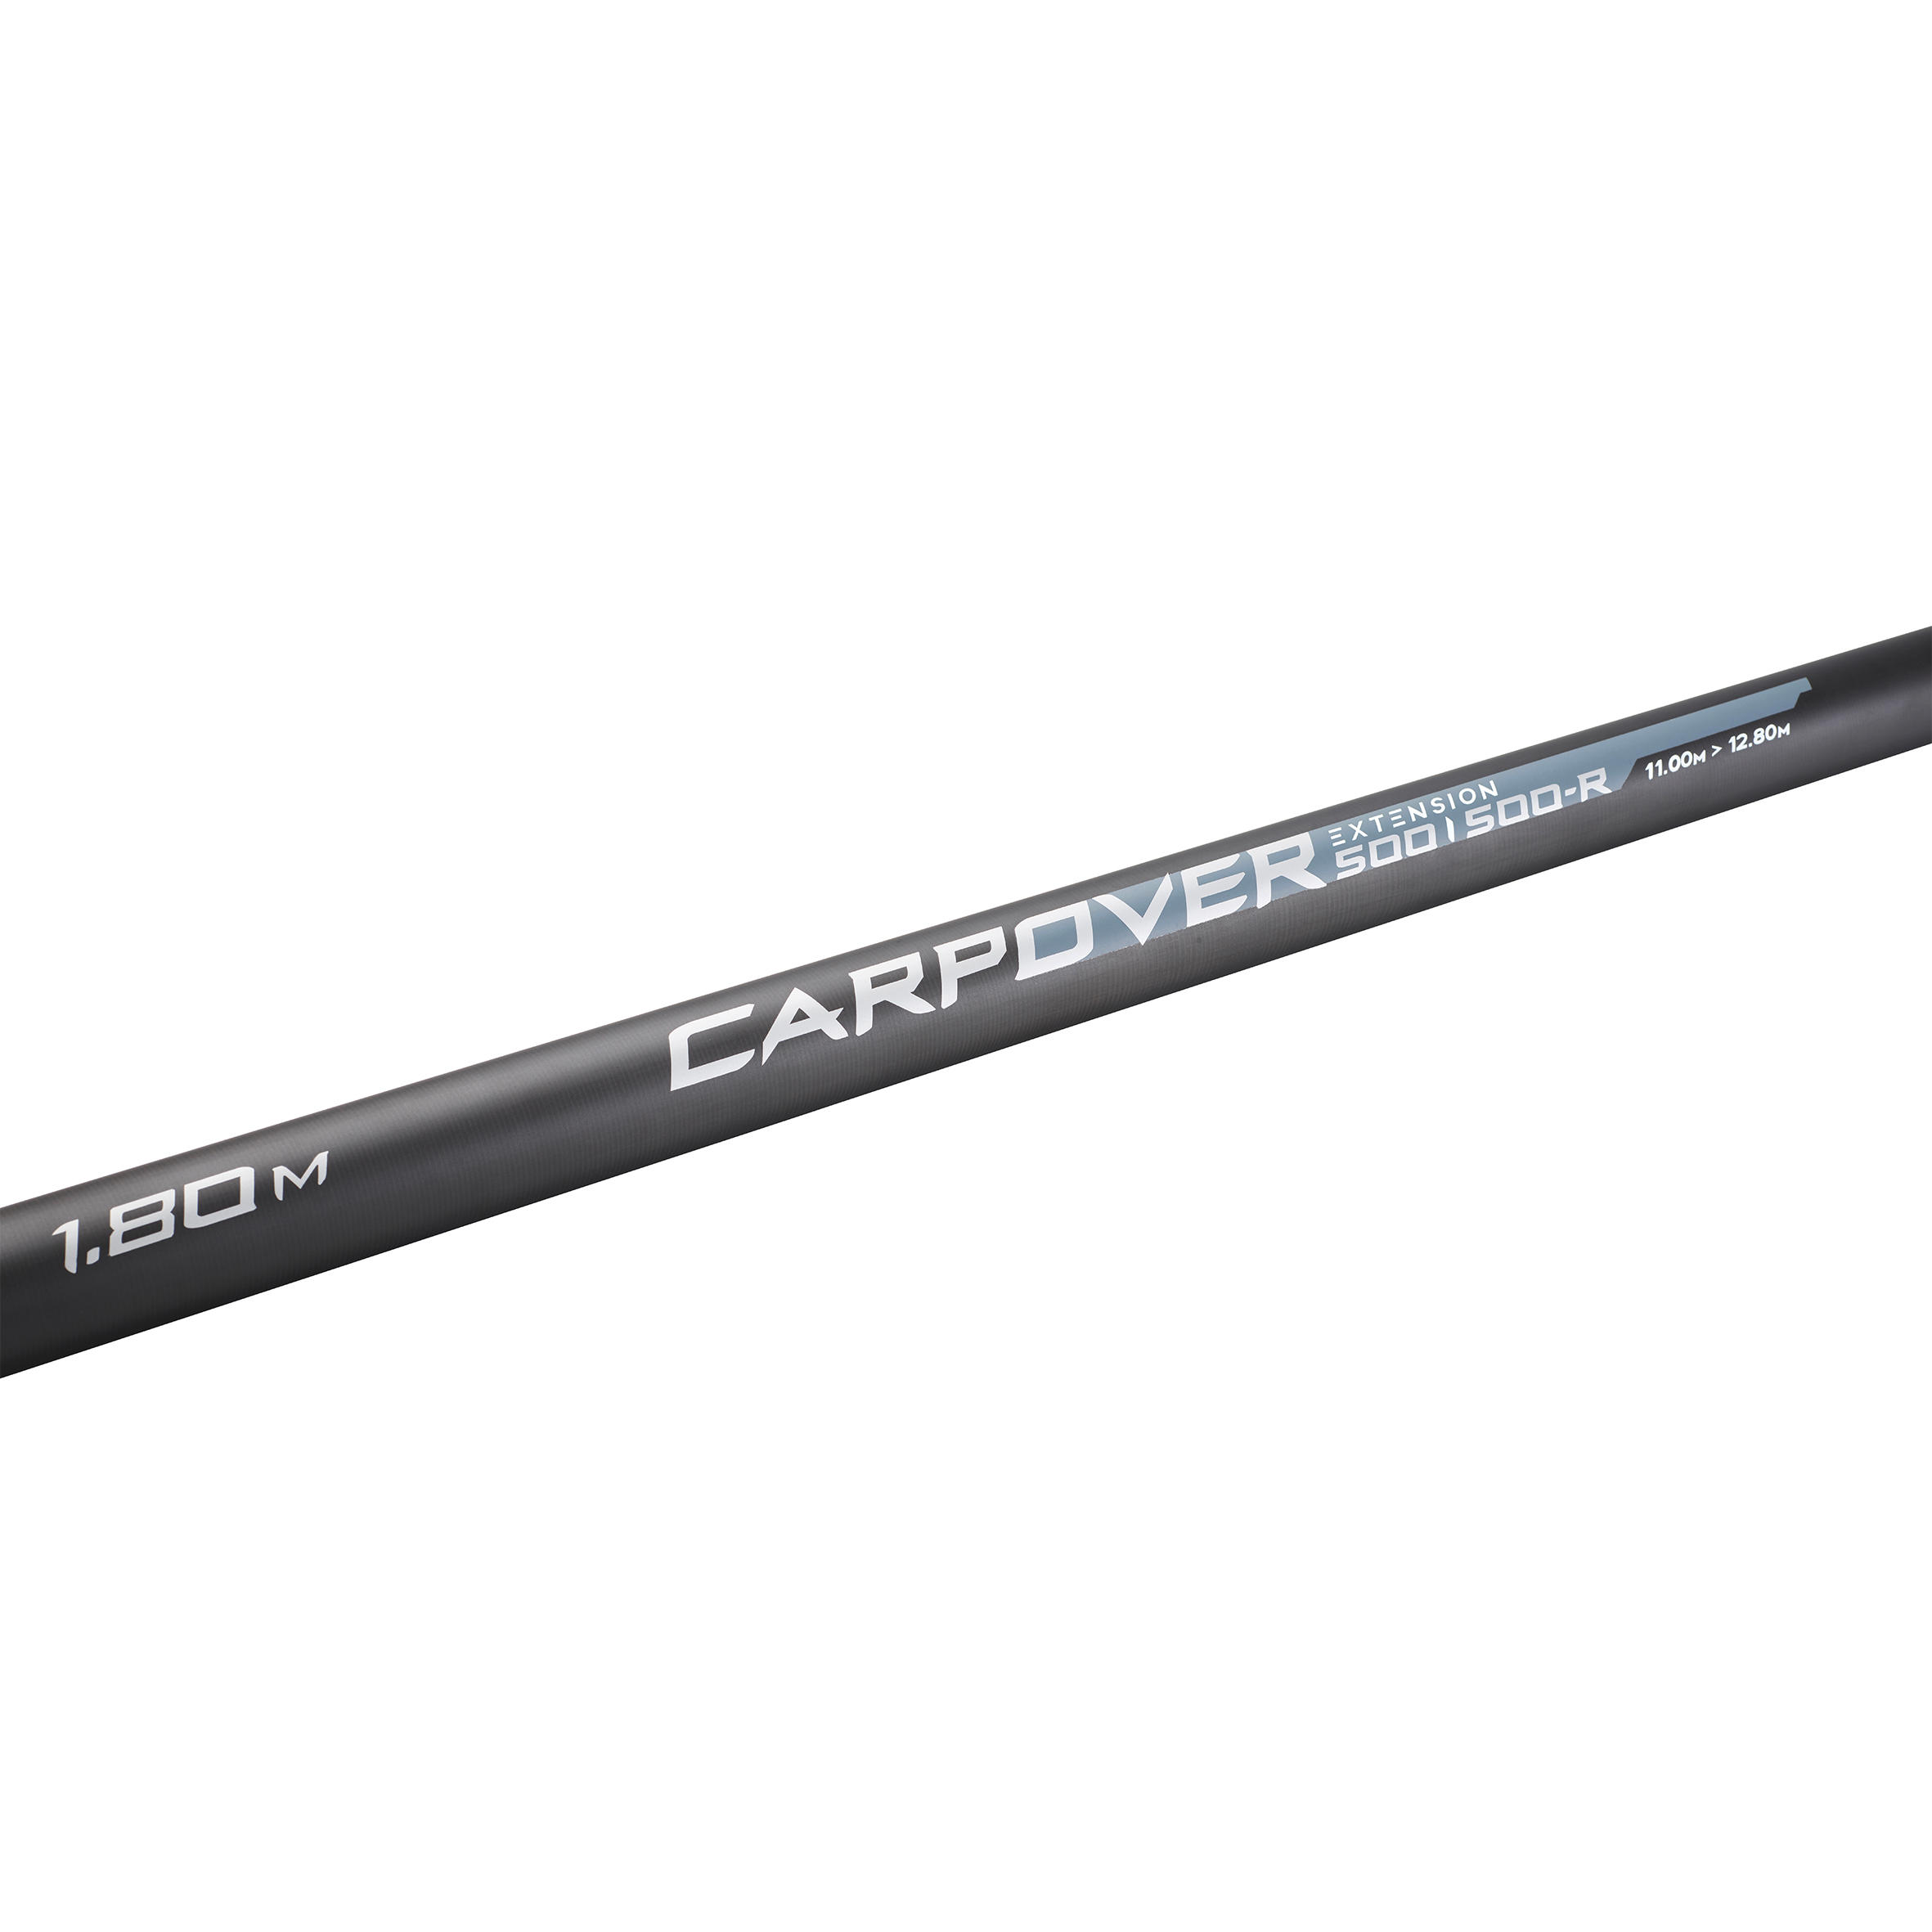 EXTENSION 1.8M  FOR RODS CARPOVER-500 AND 500R 2/7